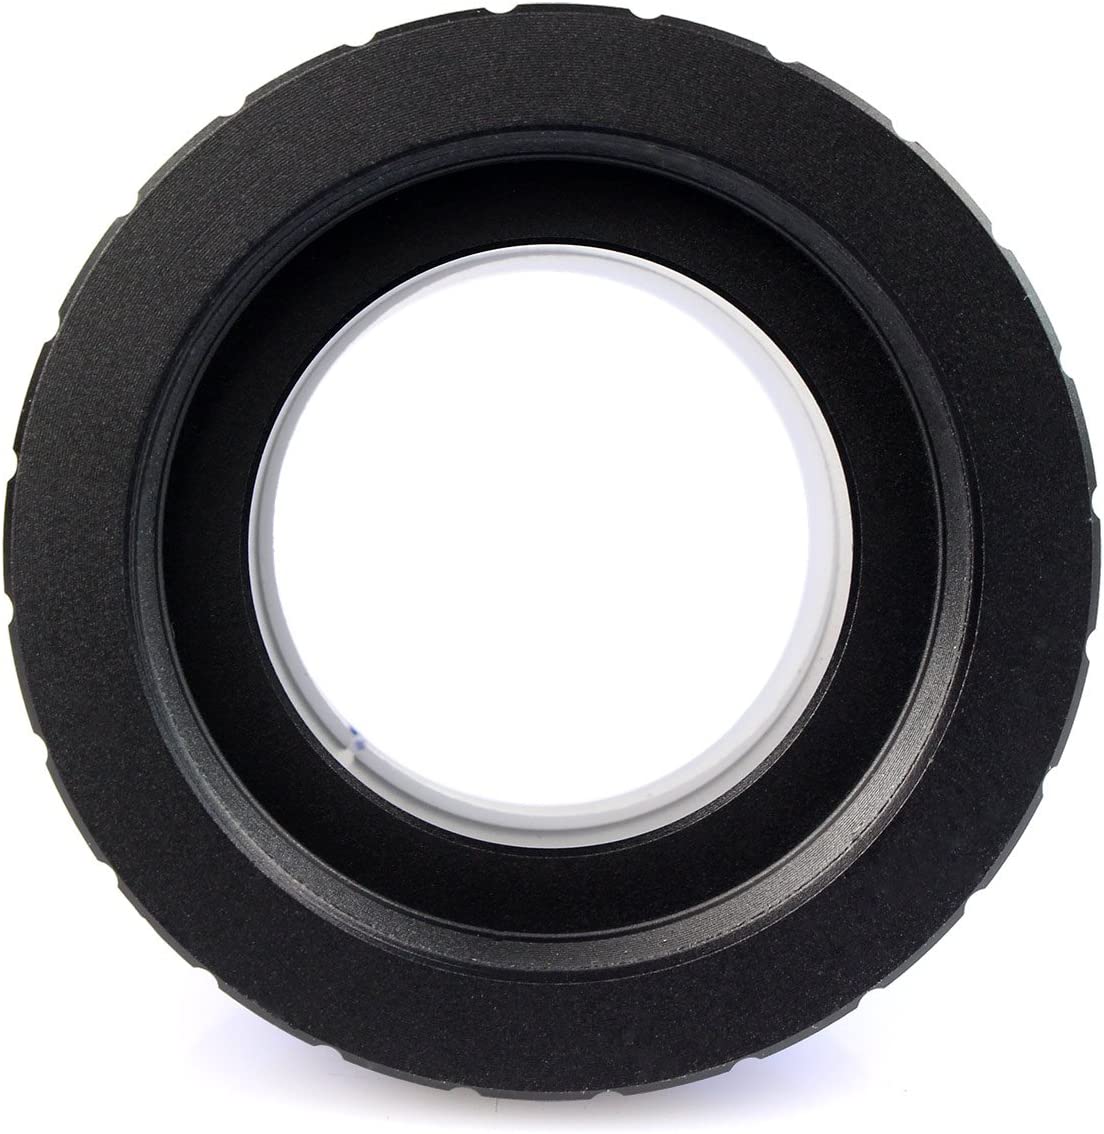 1.25 Inch Astronomy Accessories Coaxial Lock PETF Material Inner Ring